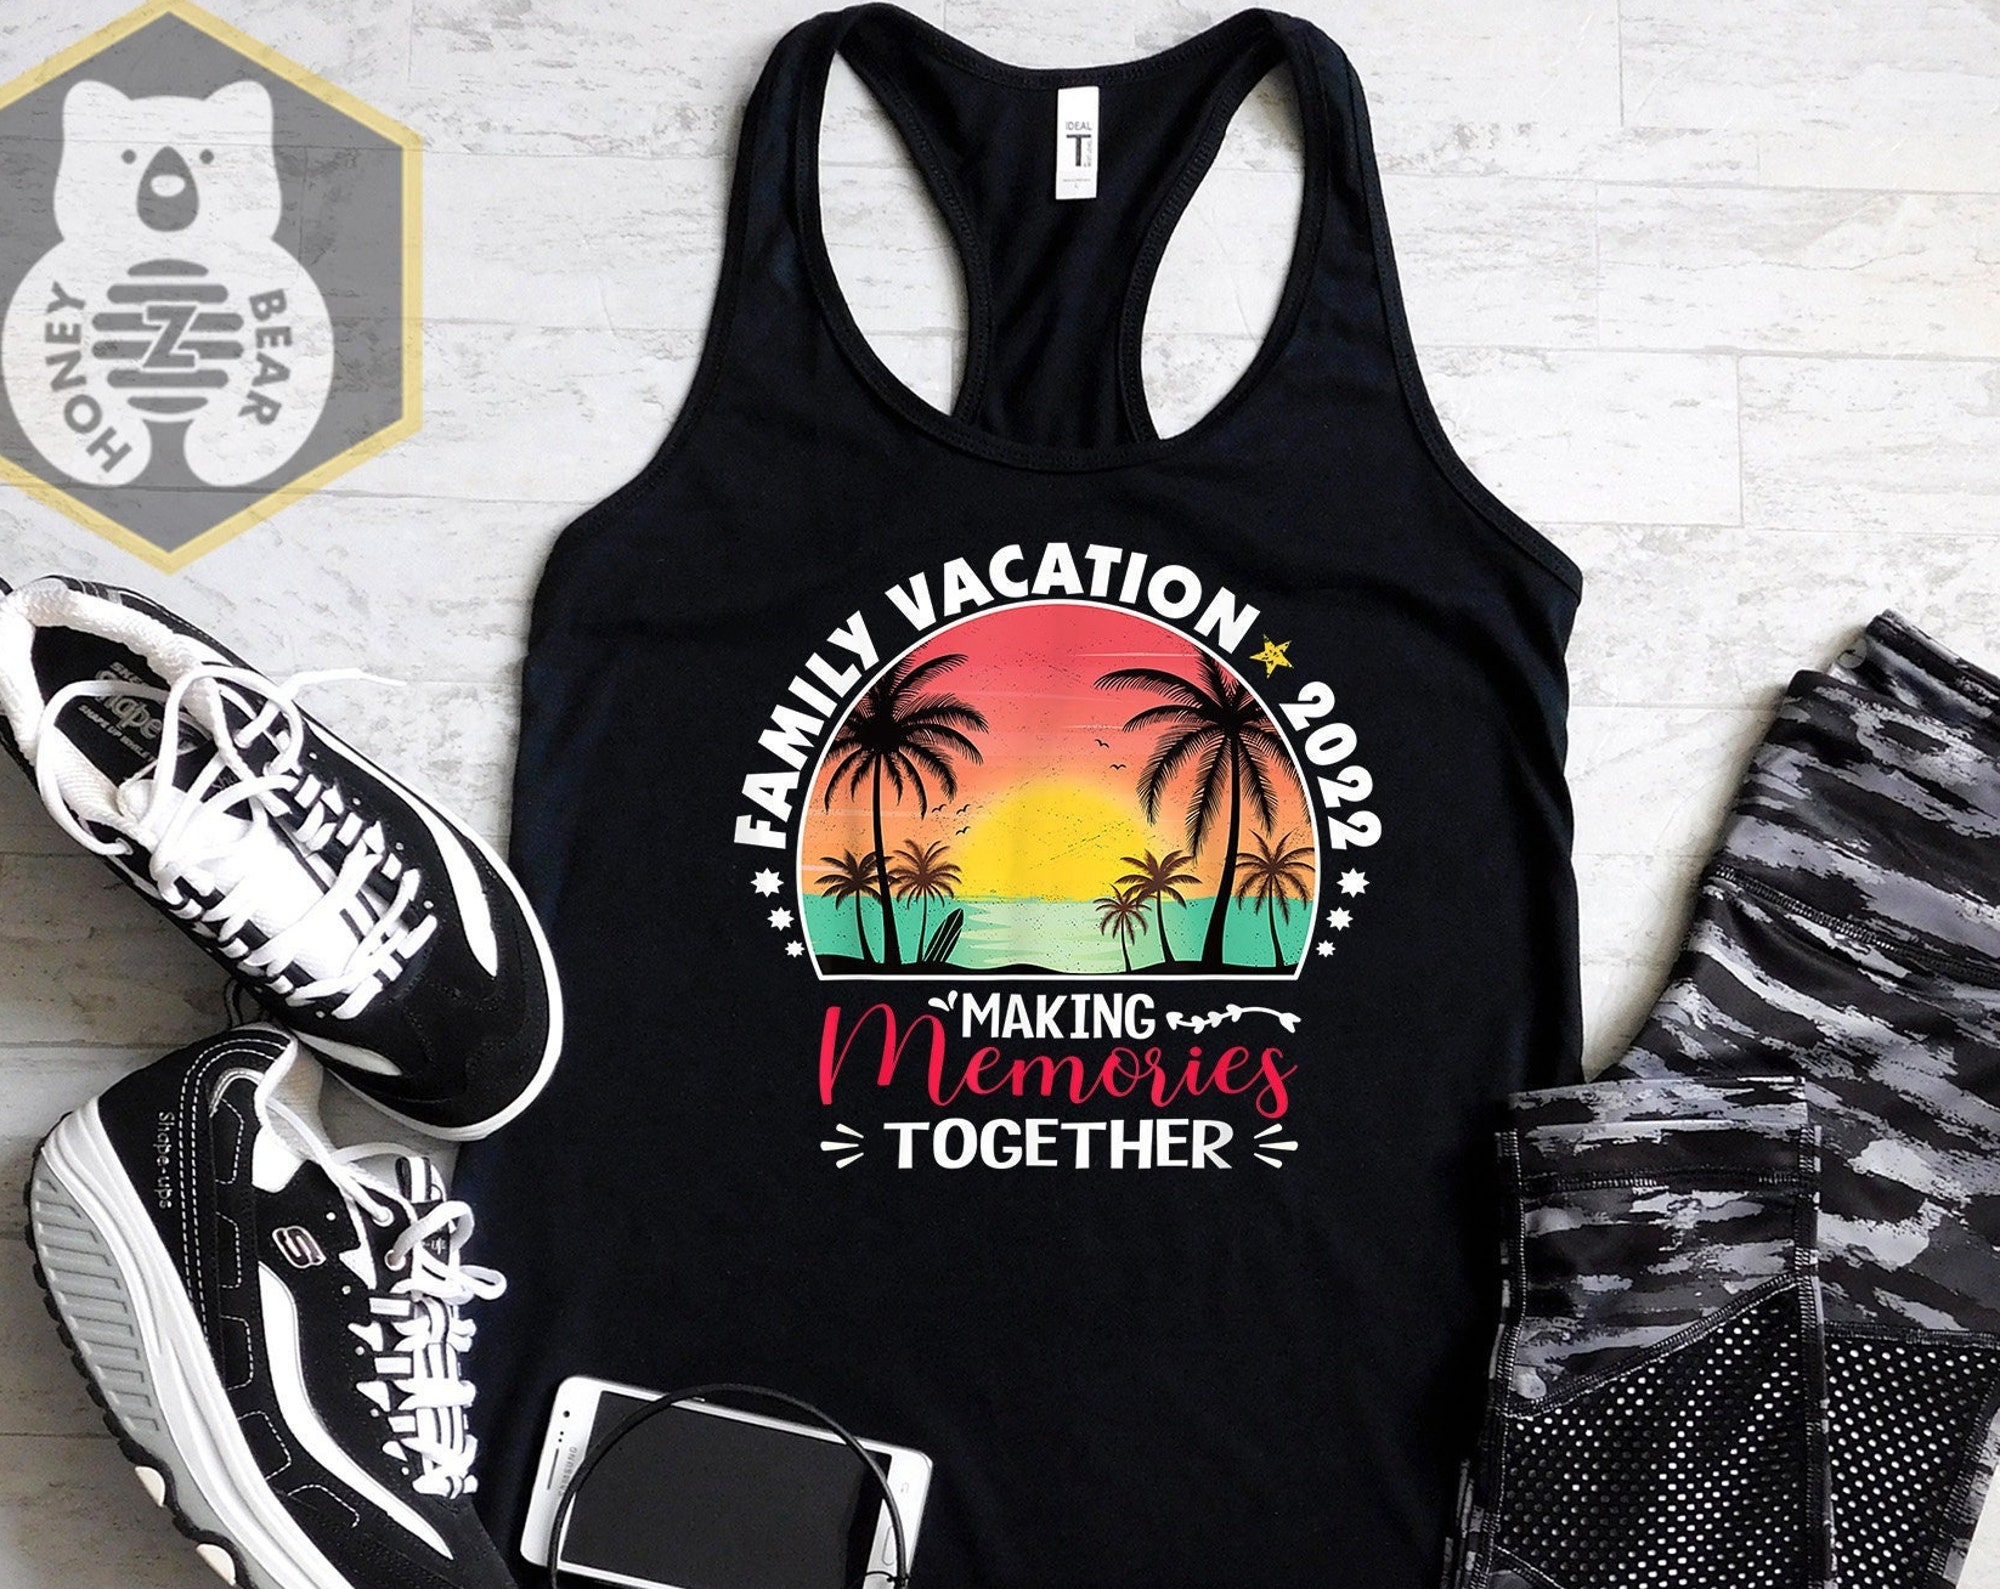 Discover Family Vacation 2022 Shirt, Making Memories Together Family Shirt,